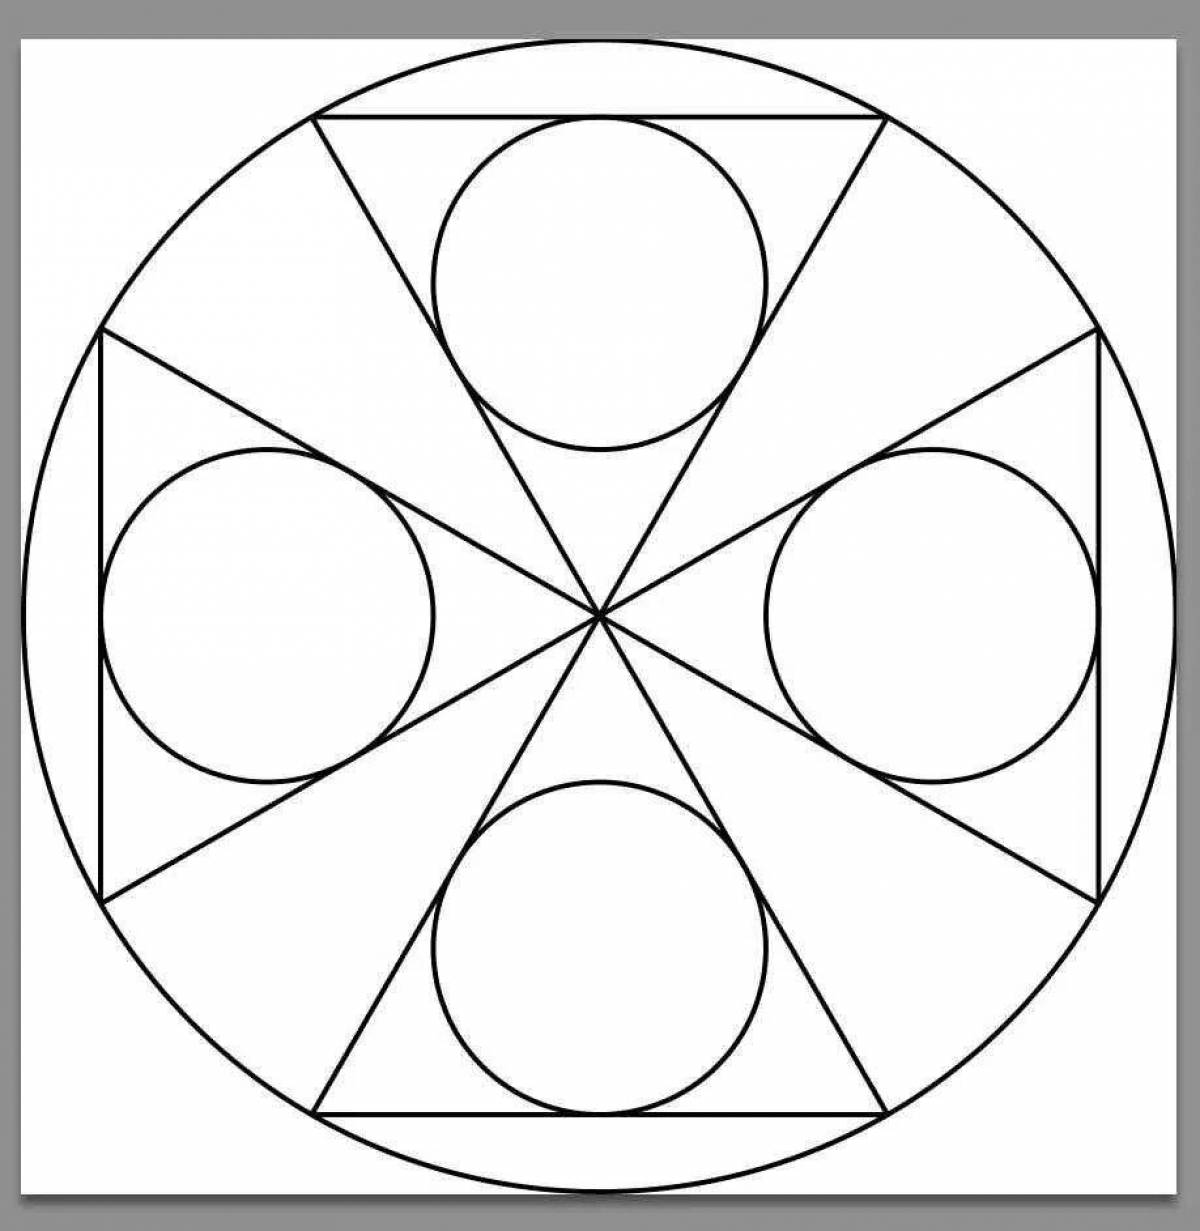 Coloring book shiny circle with lines